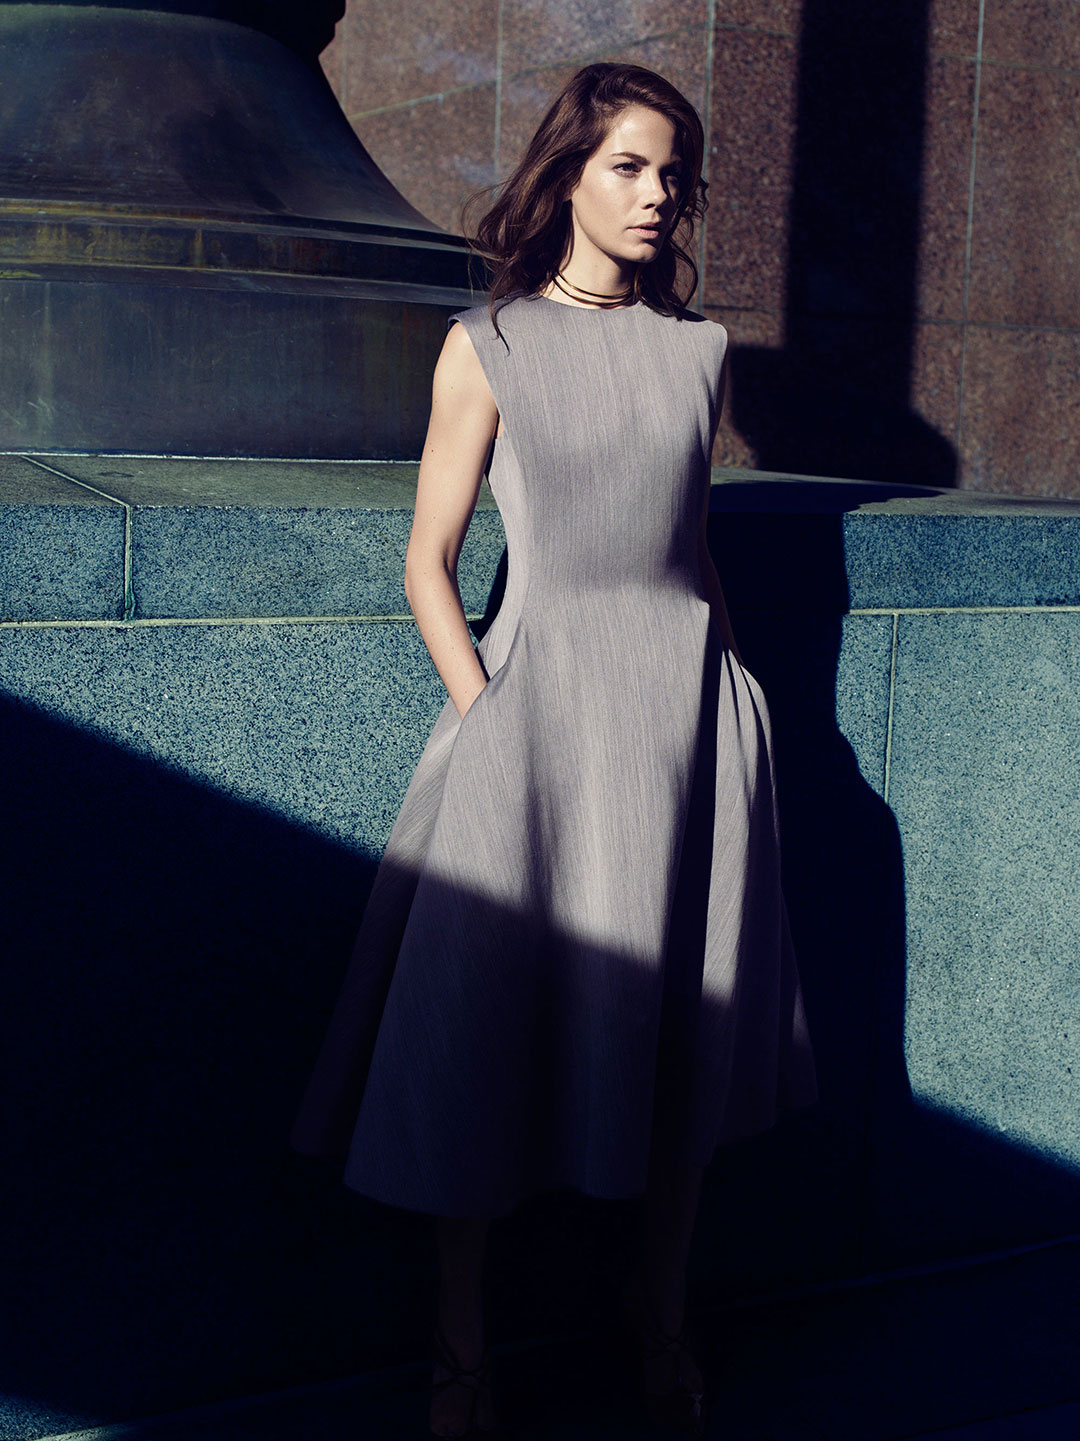 Michelle Monaghan Grey Dress Yahoo Style Content Strategy & Photography by Jane Smith Agency